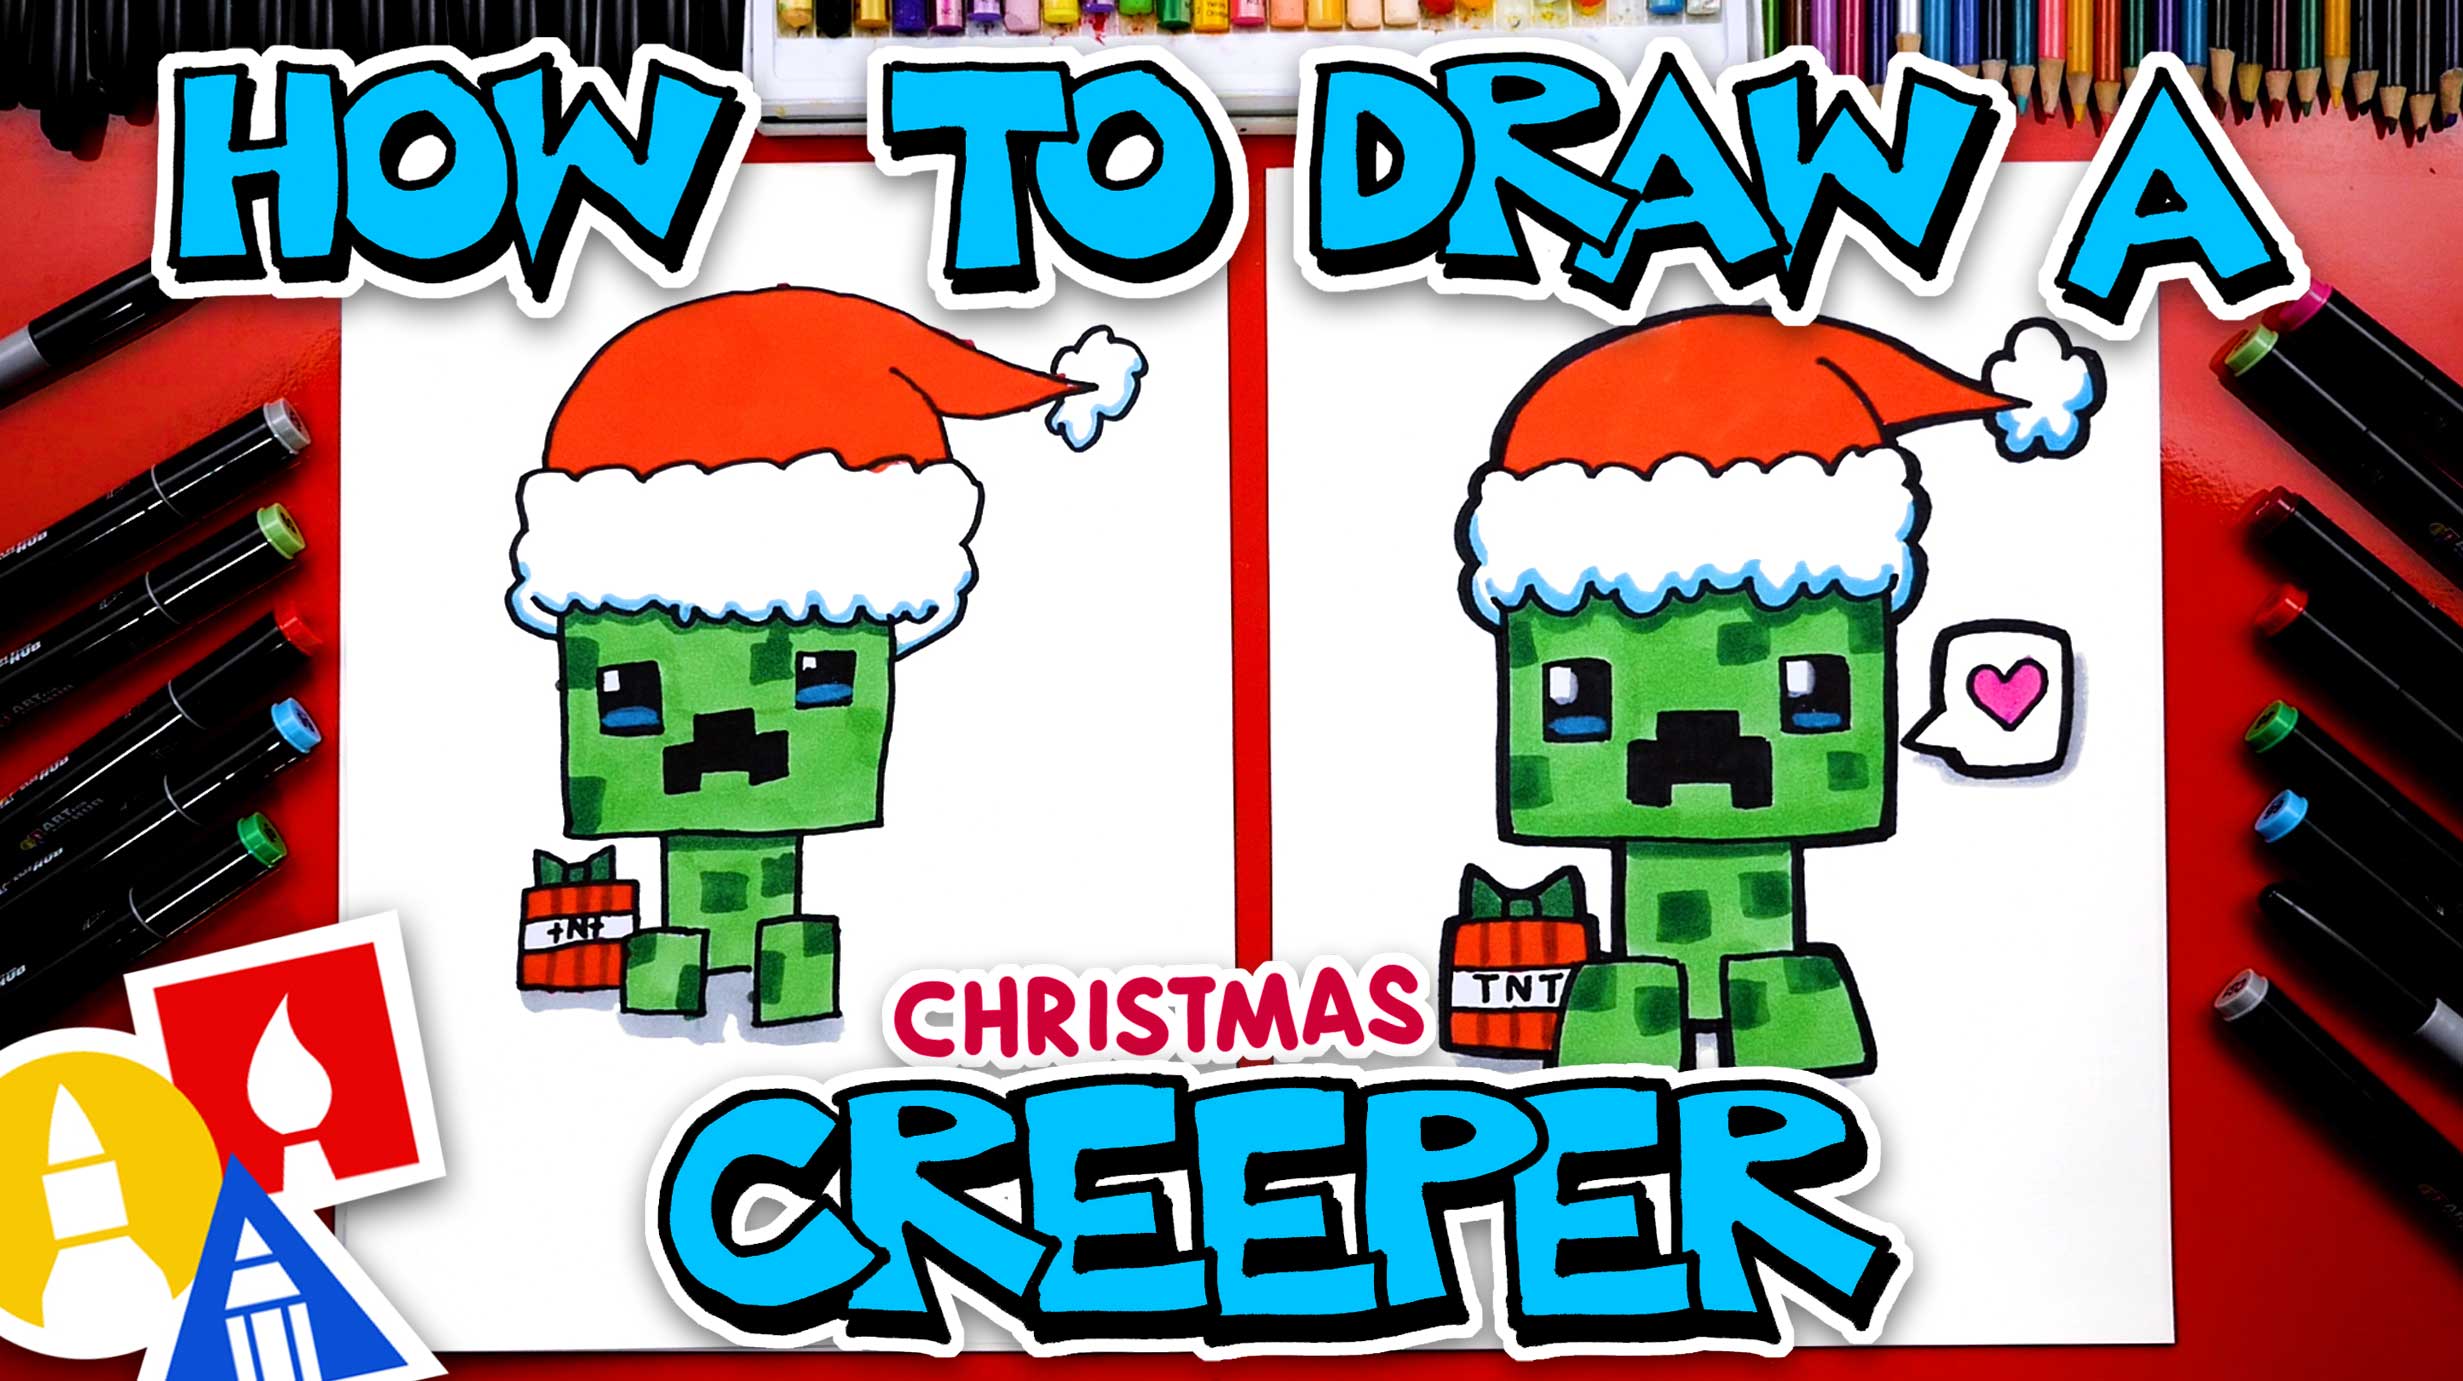 How To Draw A Creeper From Minecraft, Step by Step, Drawing Guide, by  Lachieiscool - DragoArt